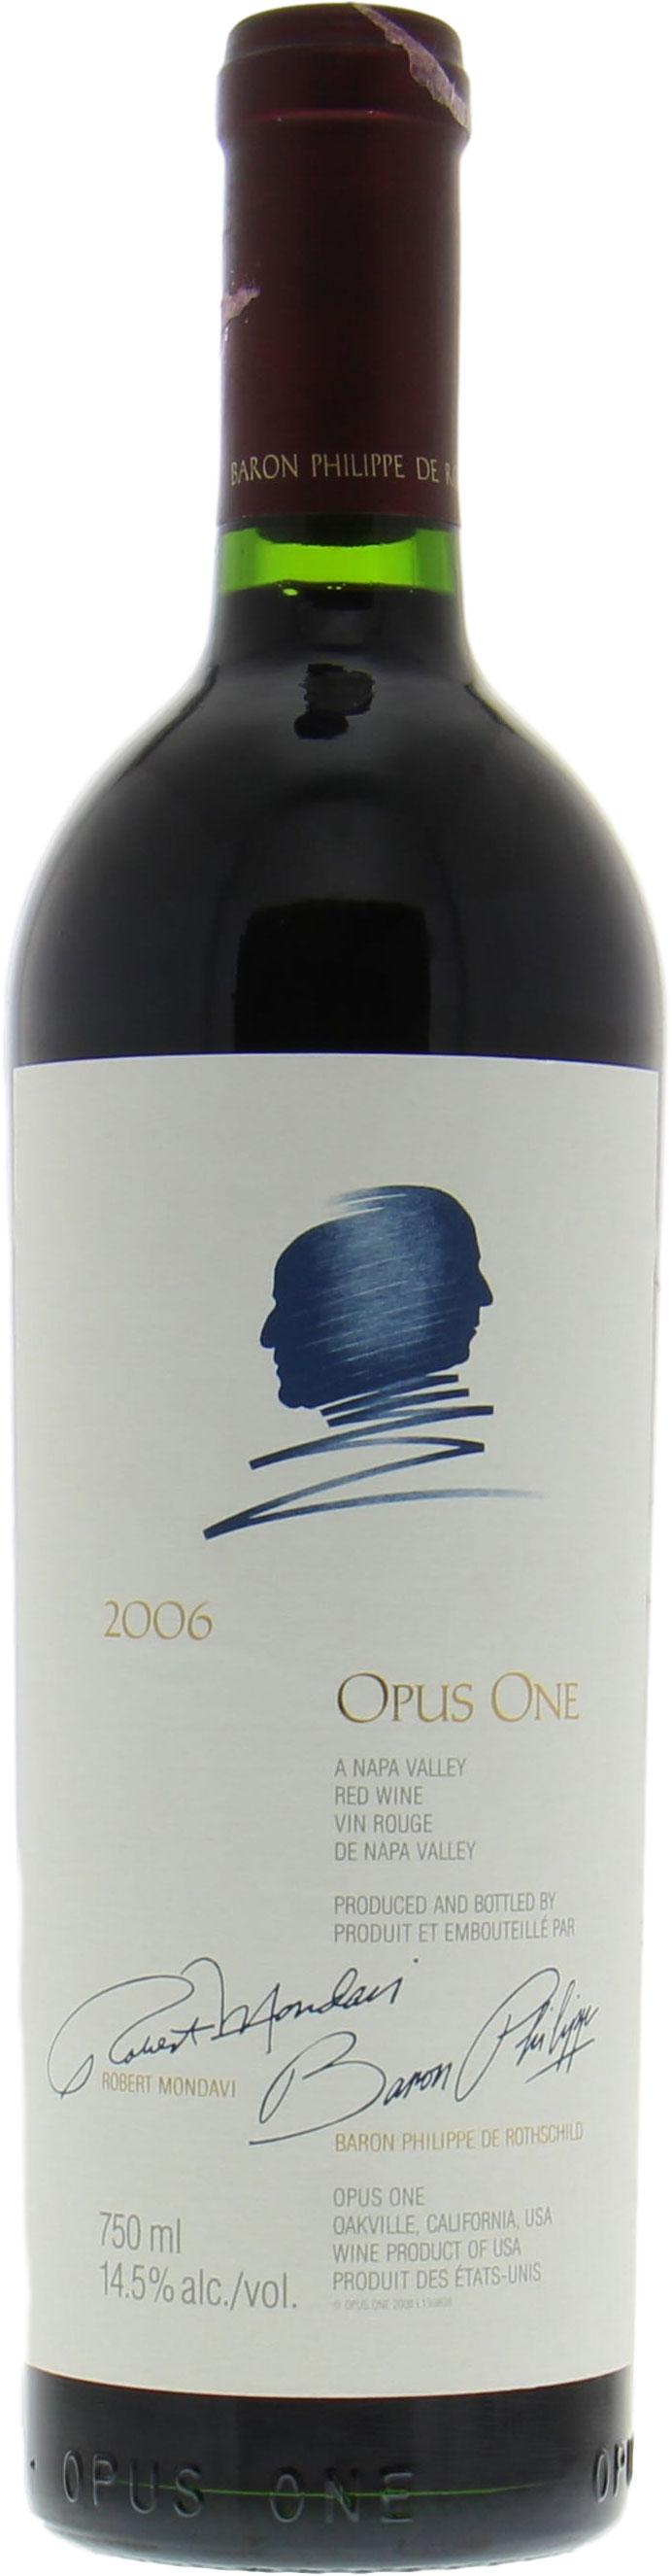 Opus One - Proprietary Red Wine 2006 Perfect